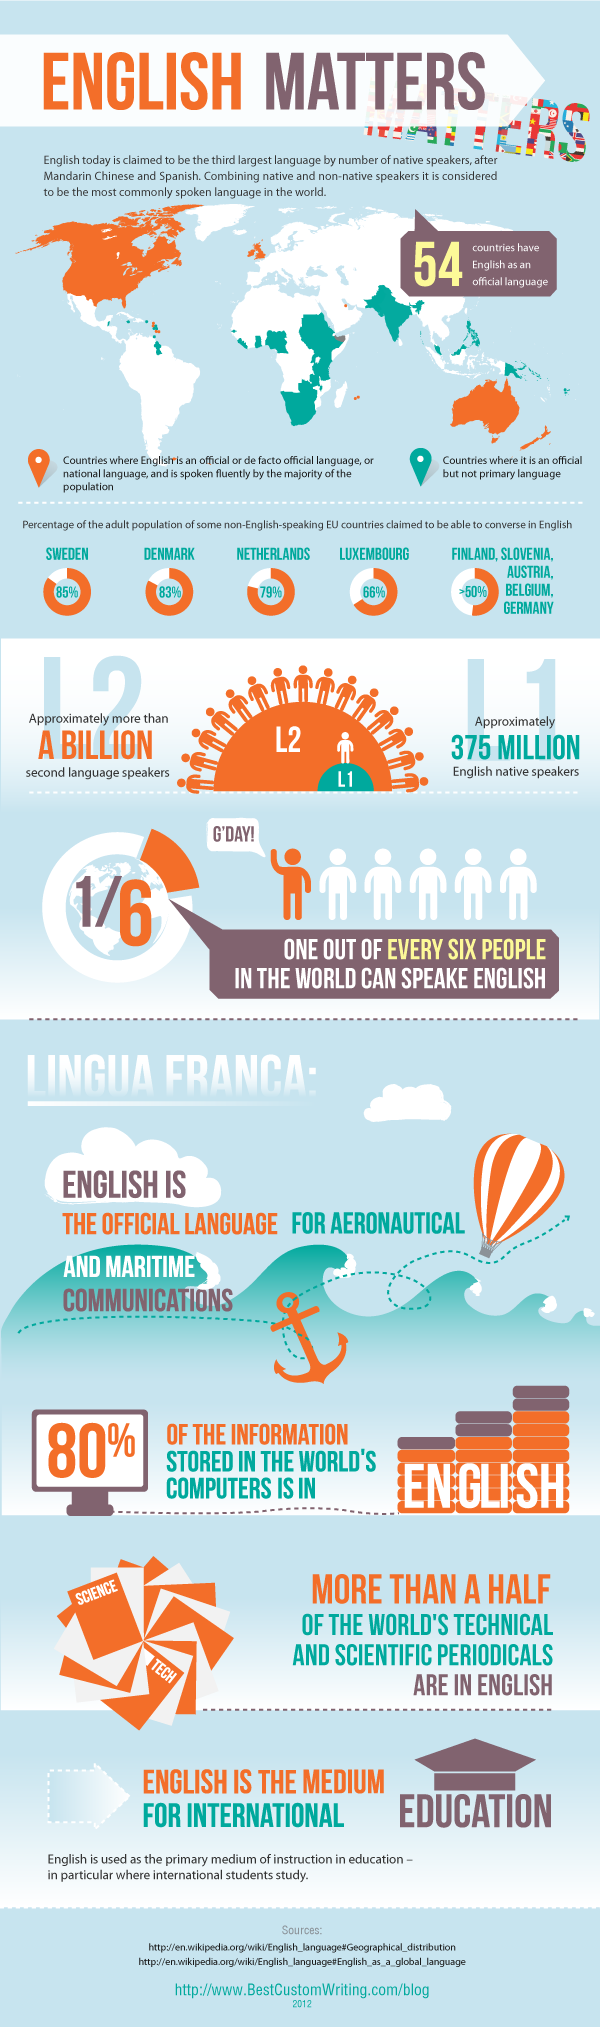 Some good reasons to learn English - IN TGN